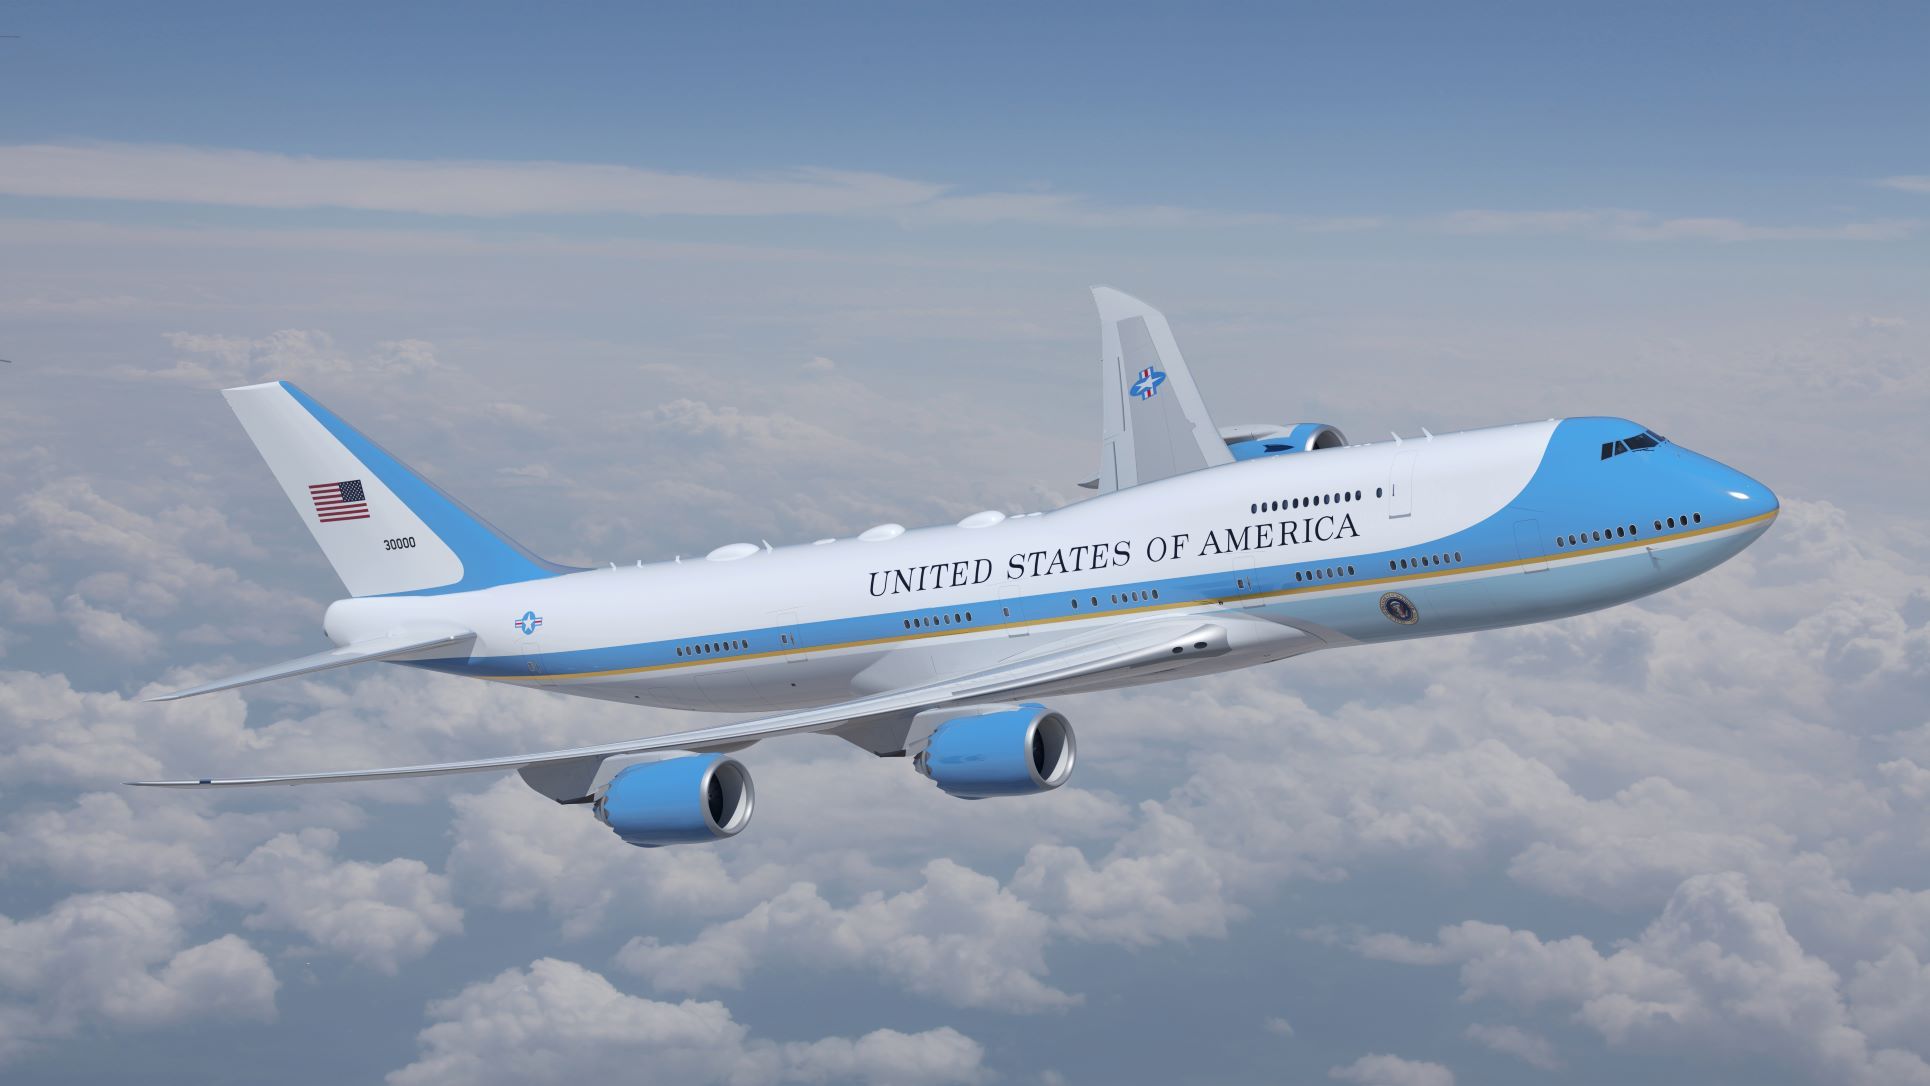 New Air Force One will officially deliver 2-3 years late - Breaking Defense